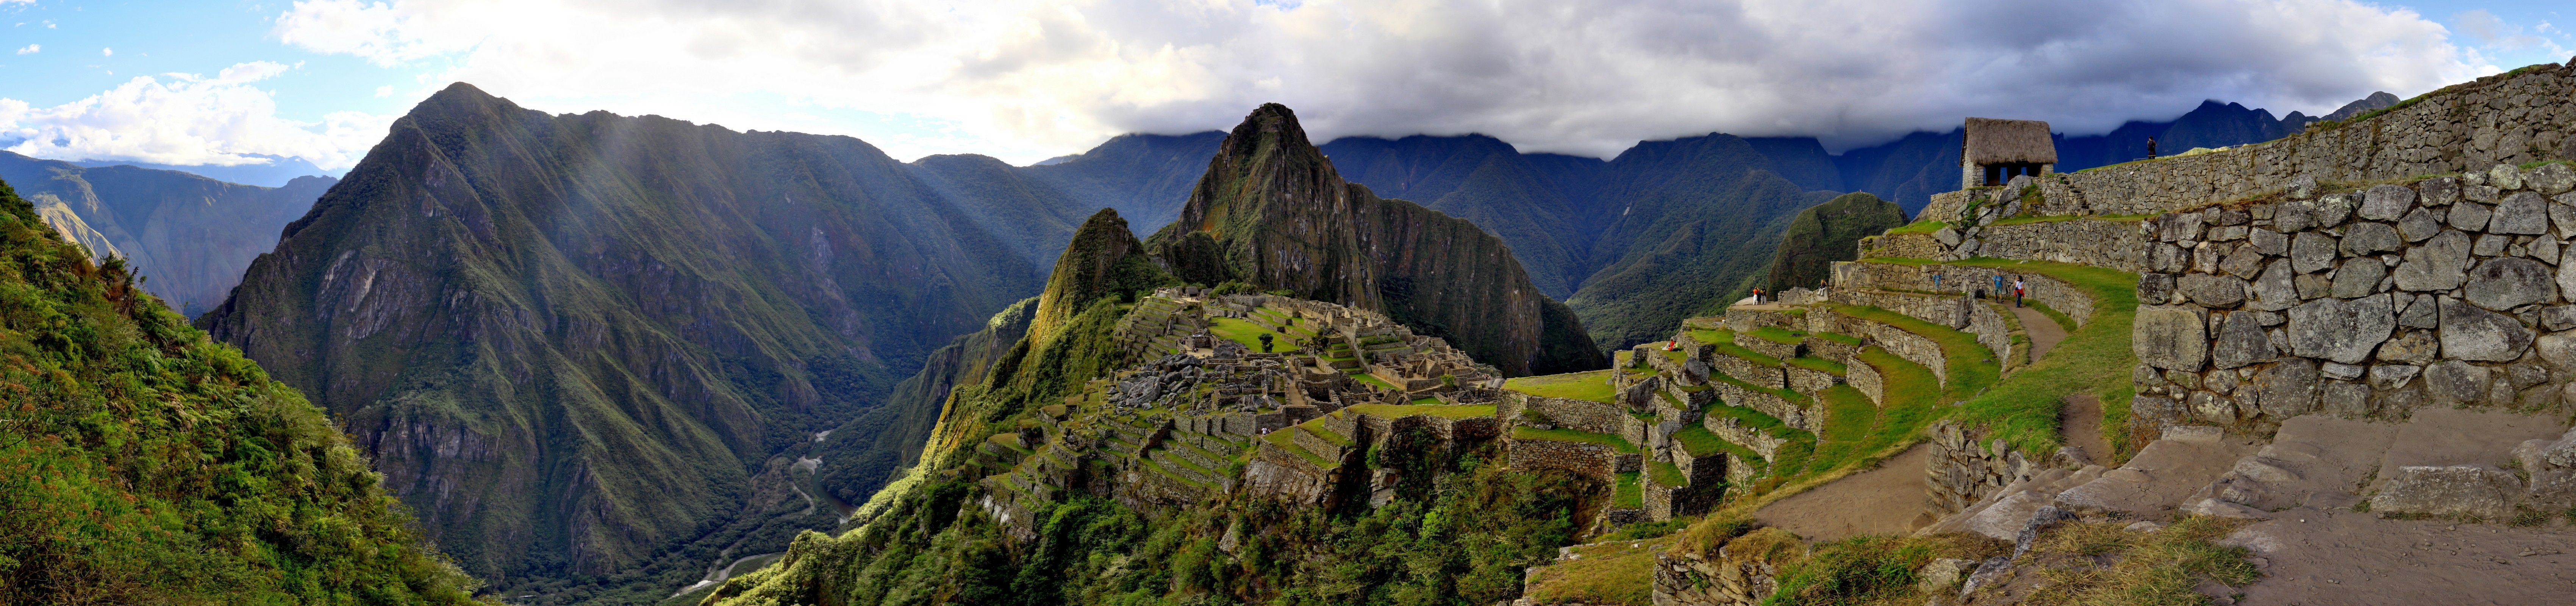 General 6800x1600 Machu Picchu ancient Peru ruins landscape mountains multiple display people World Heritage Site history